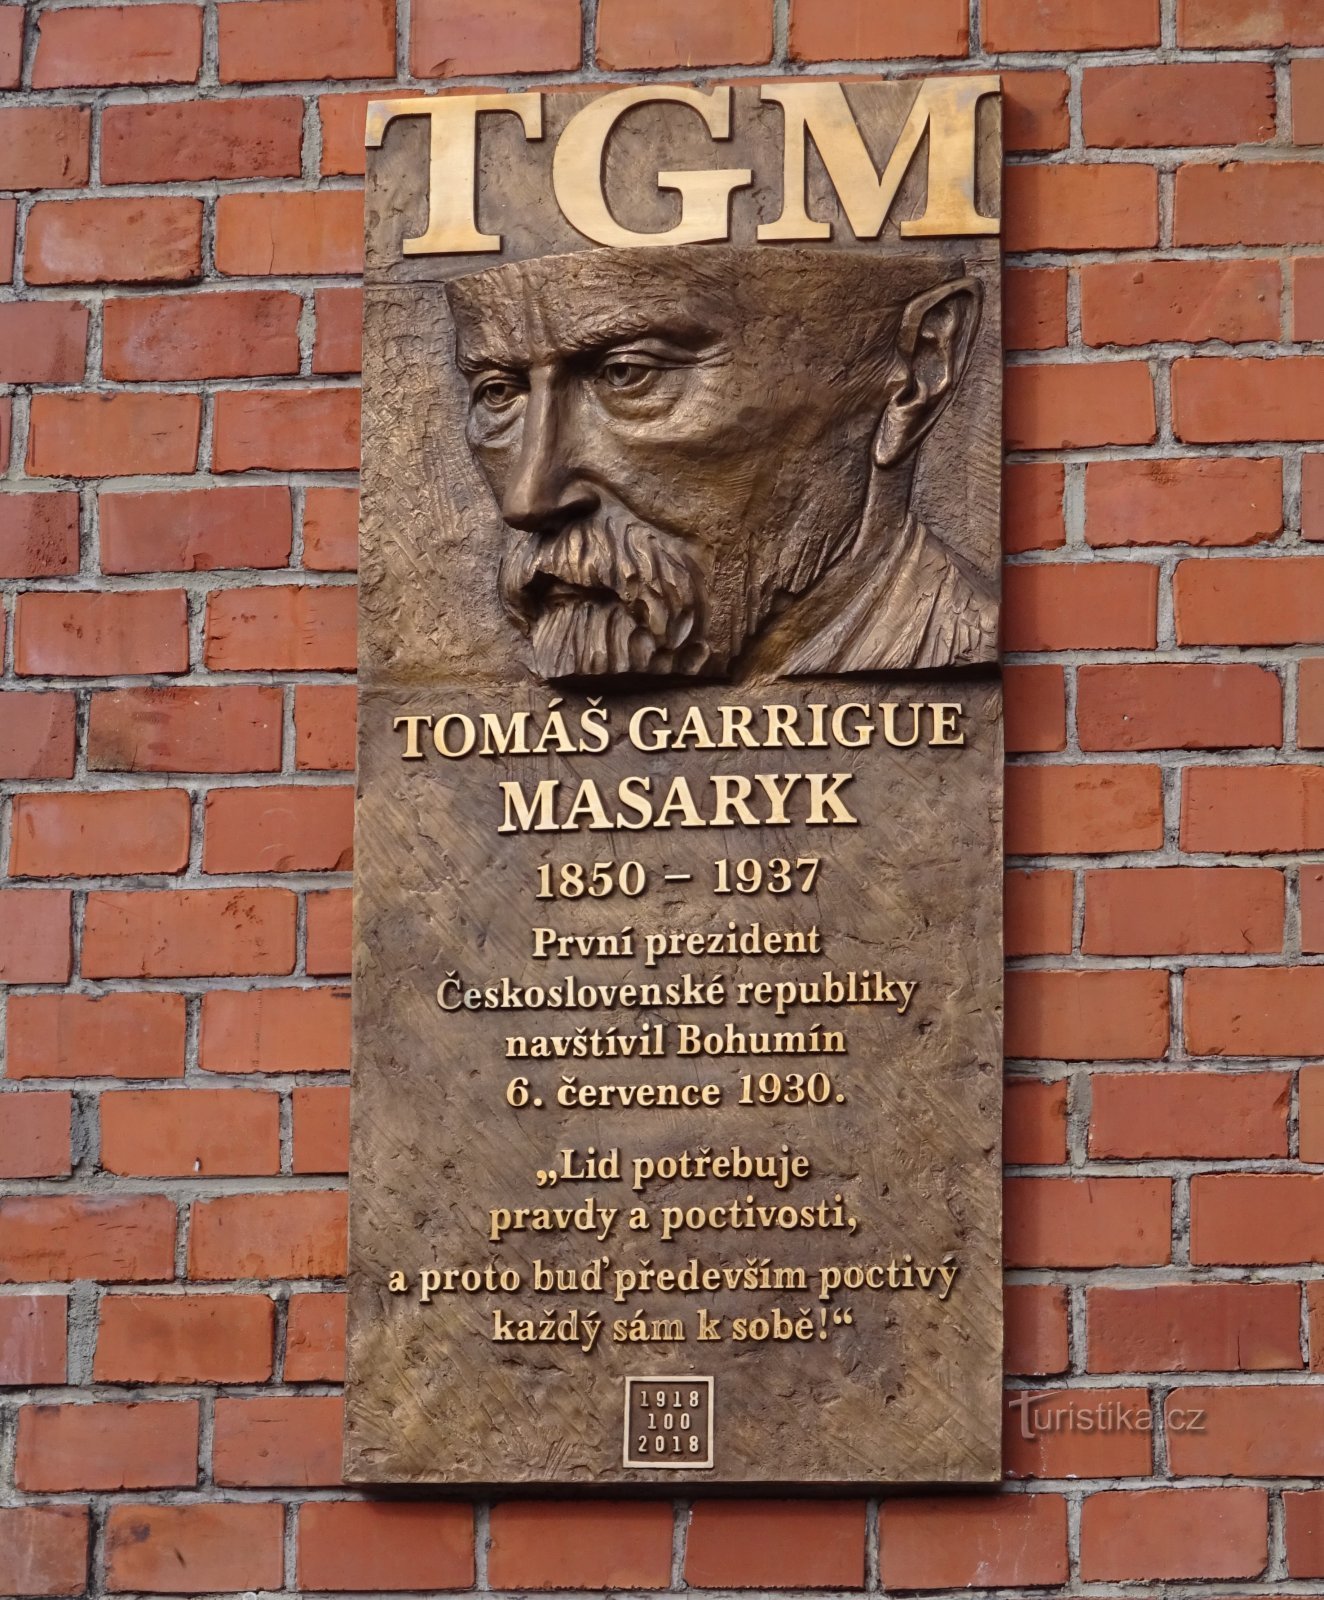 commemorative plaque on the building of the former town hall